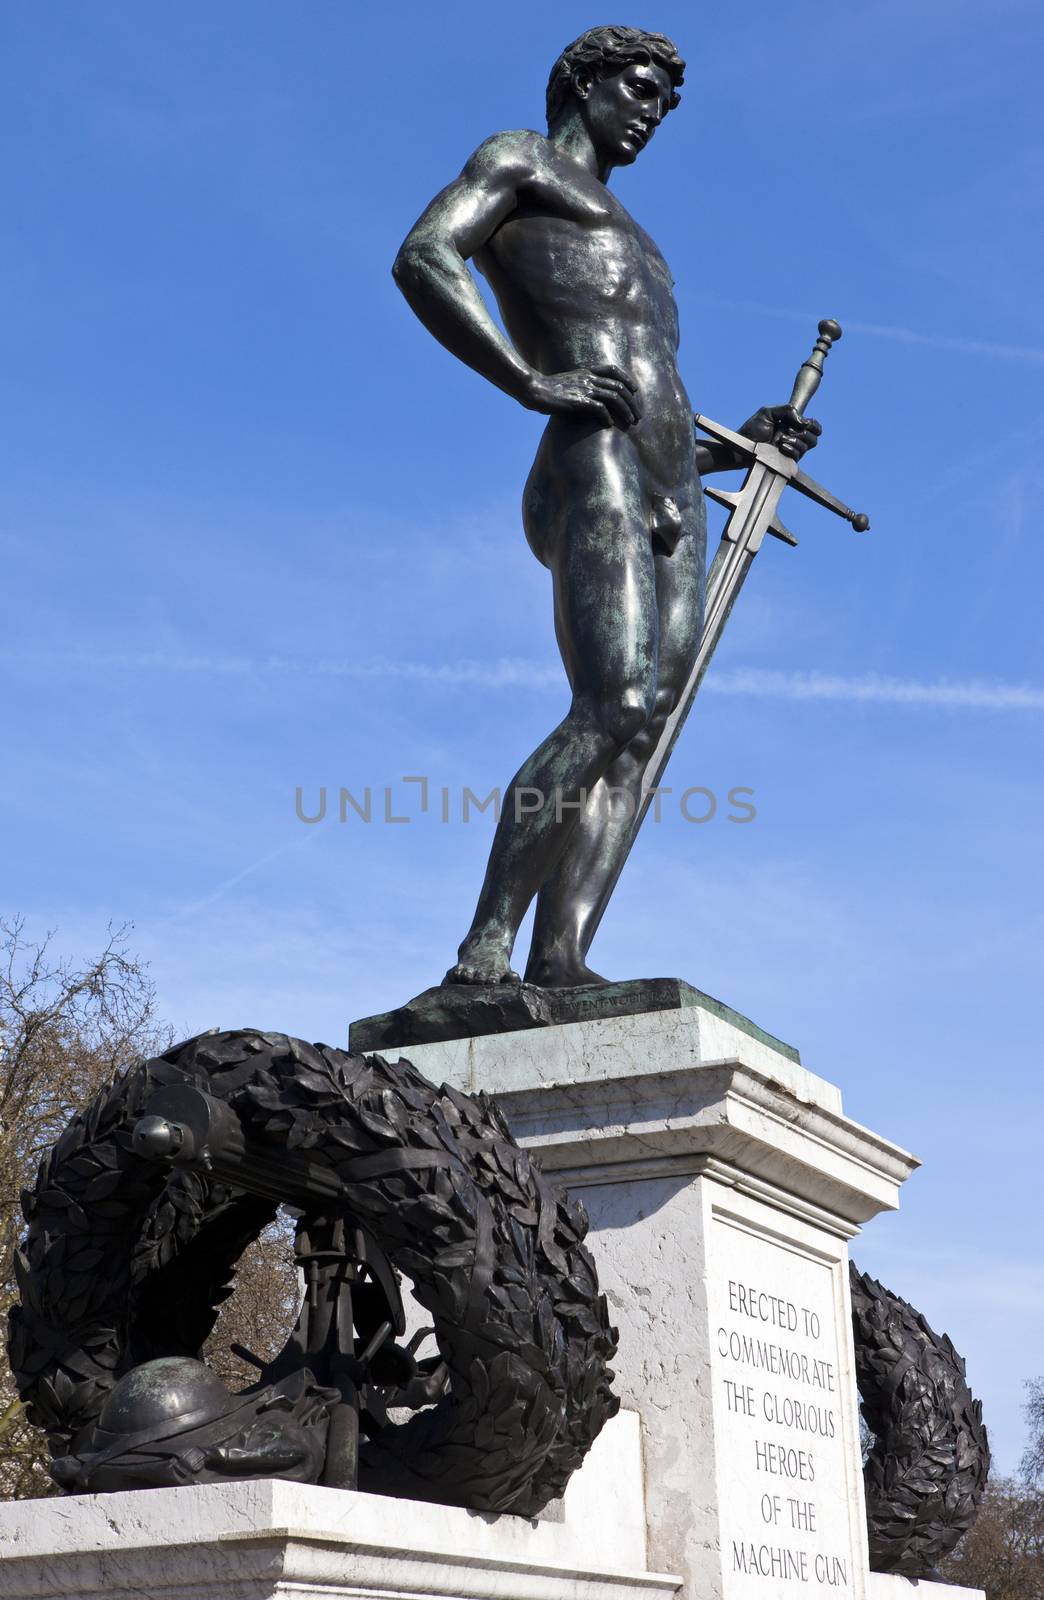 Memorial dedicated to the dead of the Machine Gun Corps in the First World War at Hyde Park Corner , London.